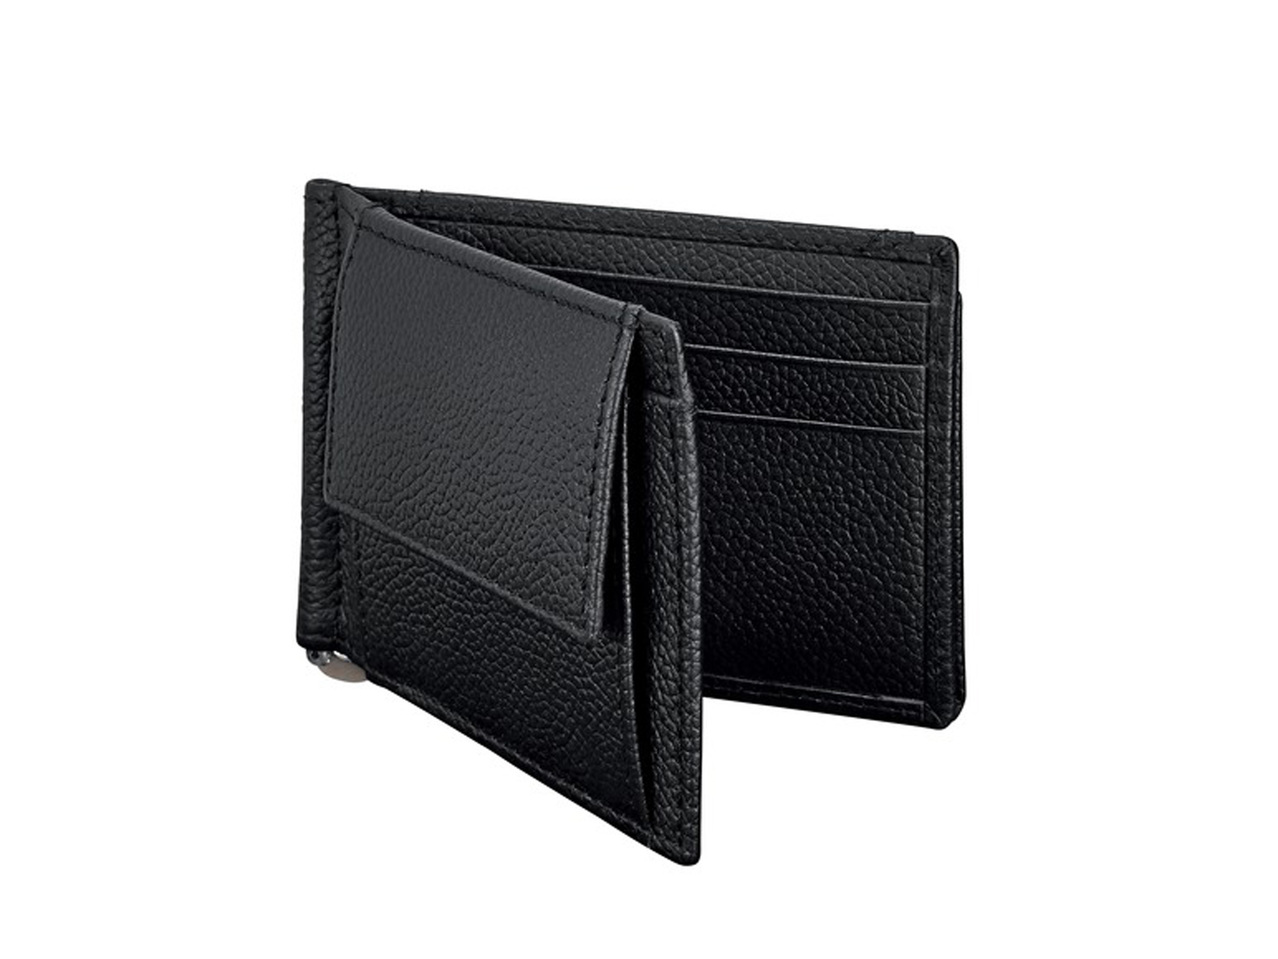 LIVERGY Leather Wallet